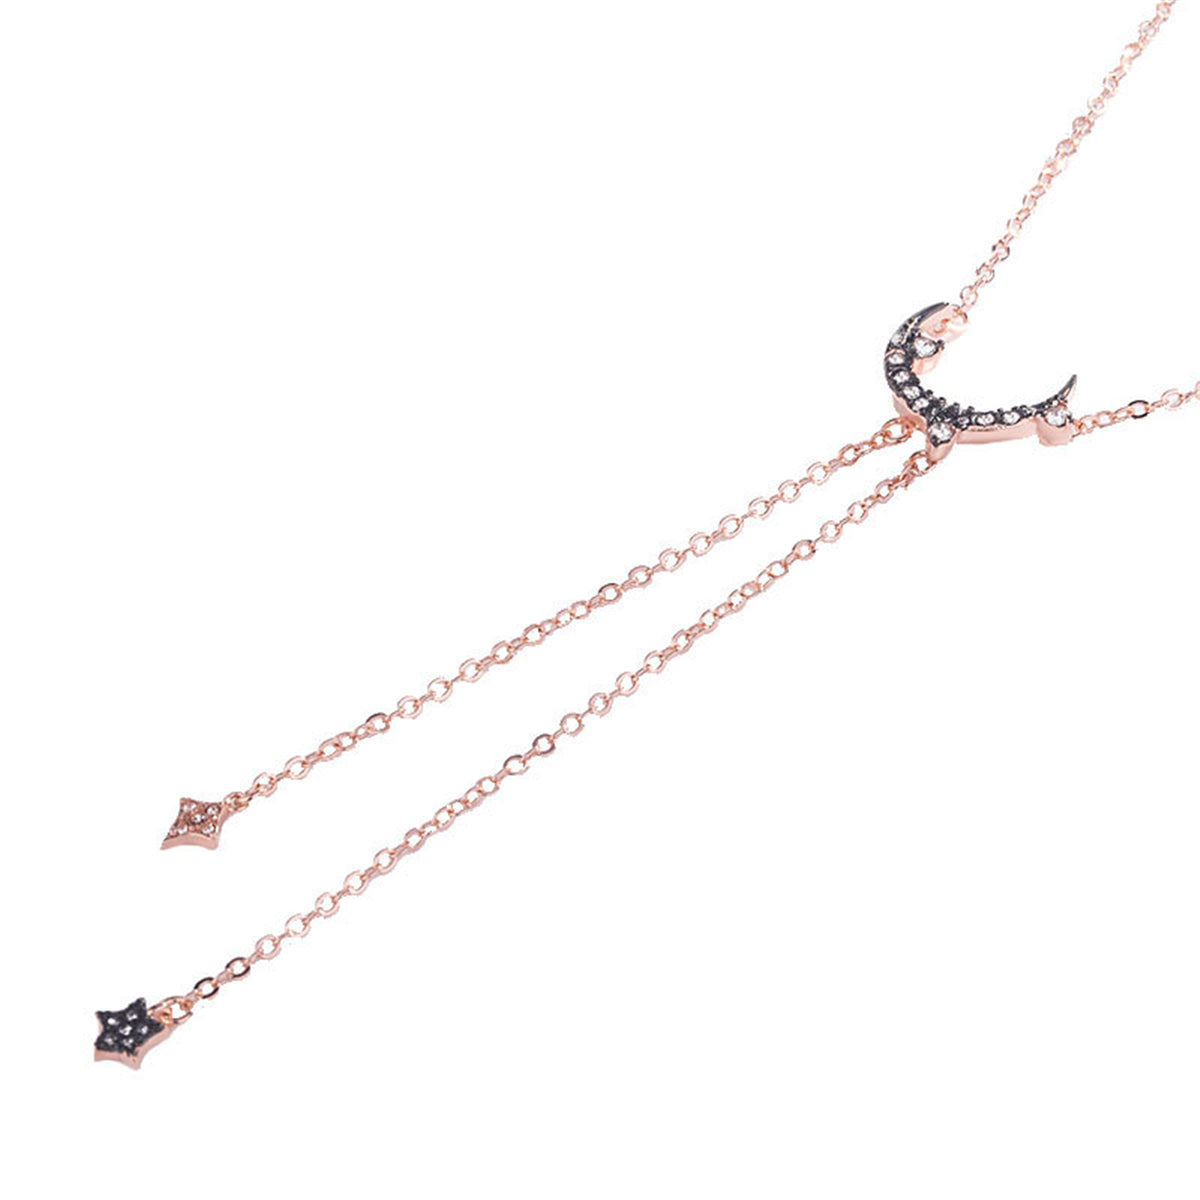 Black Cubic Zirconia & 18K Rose Gold-Plated Pendant Necklace